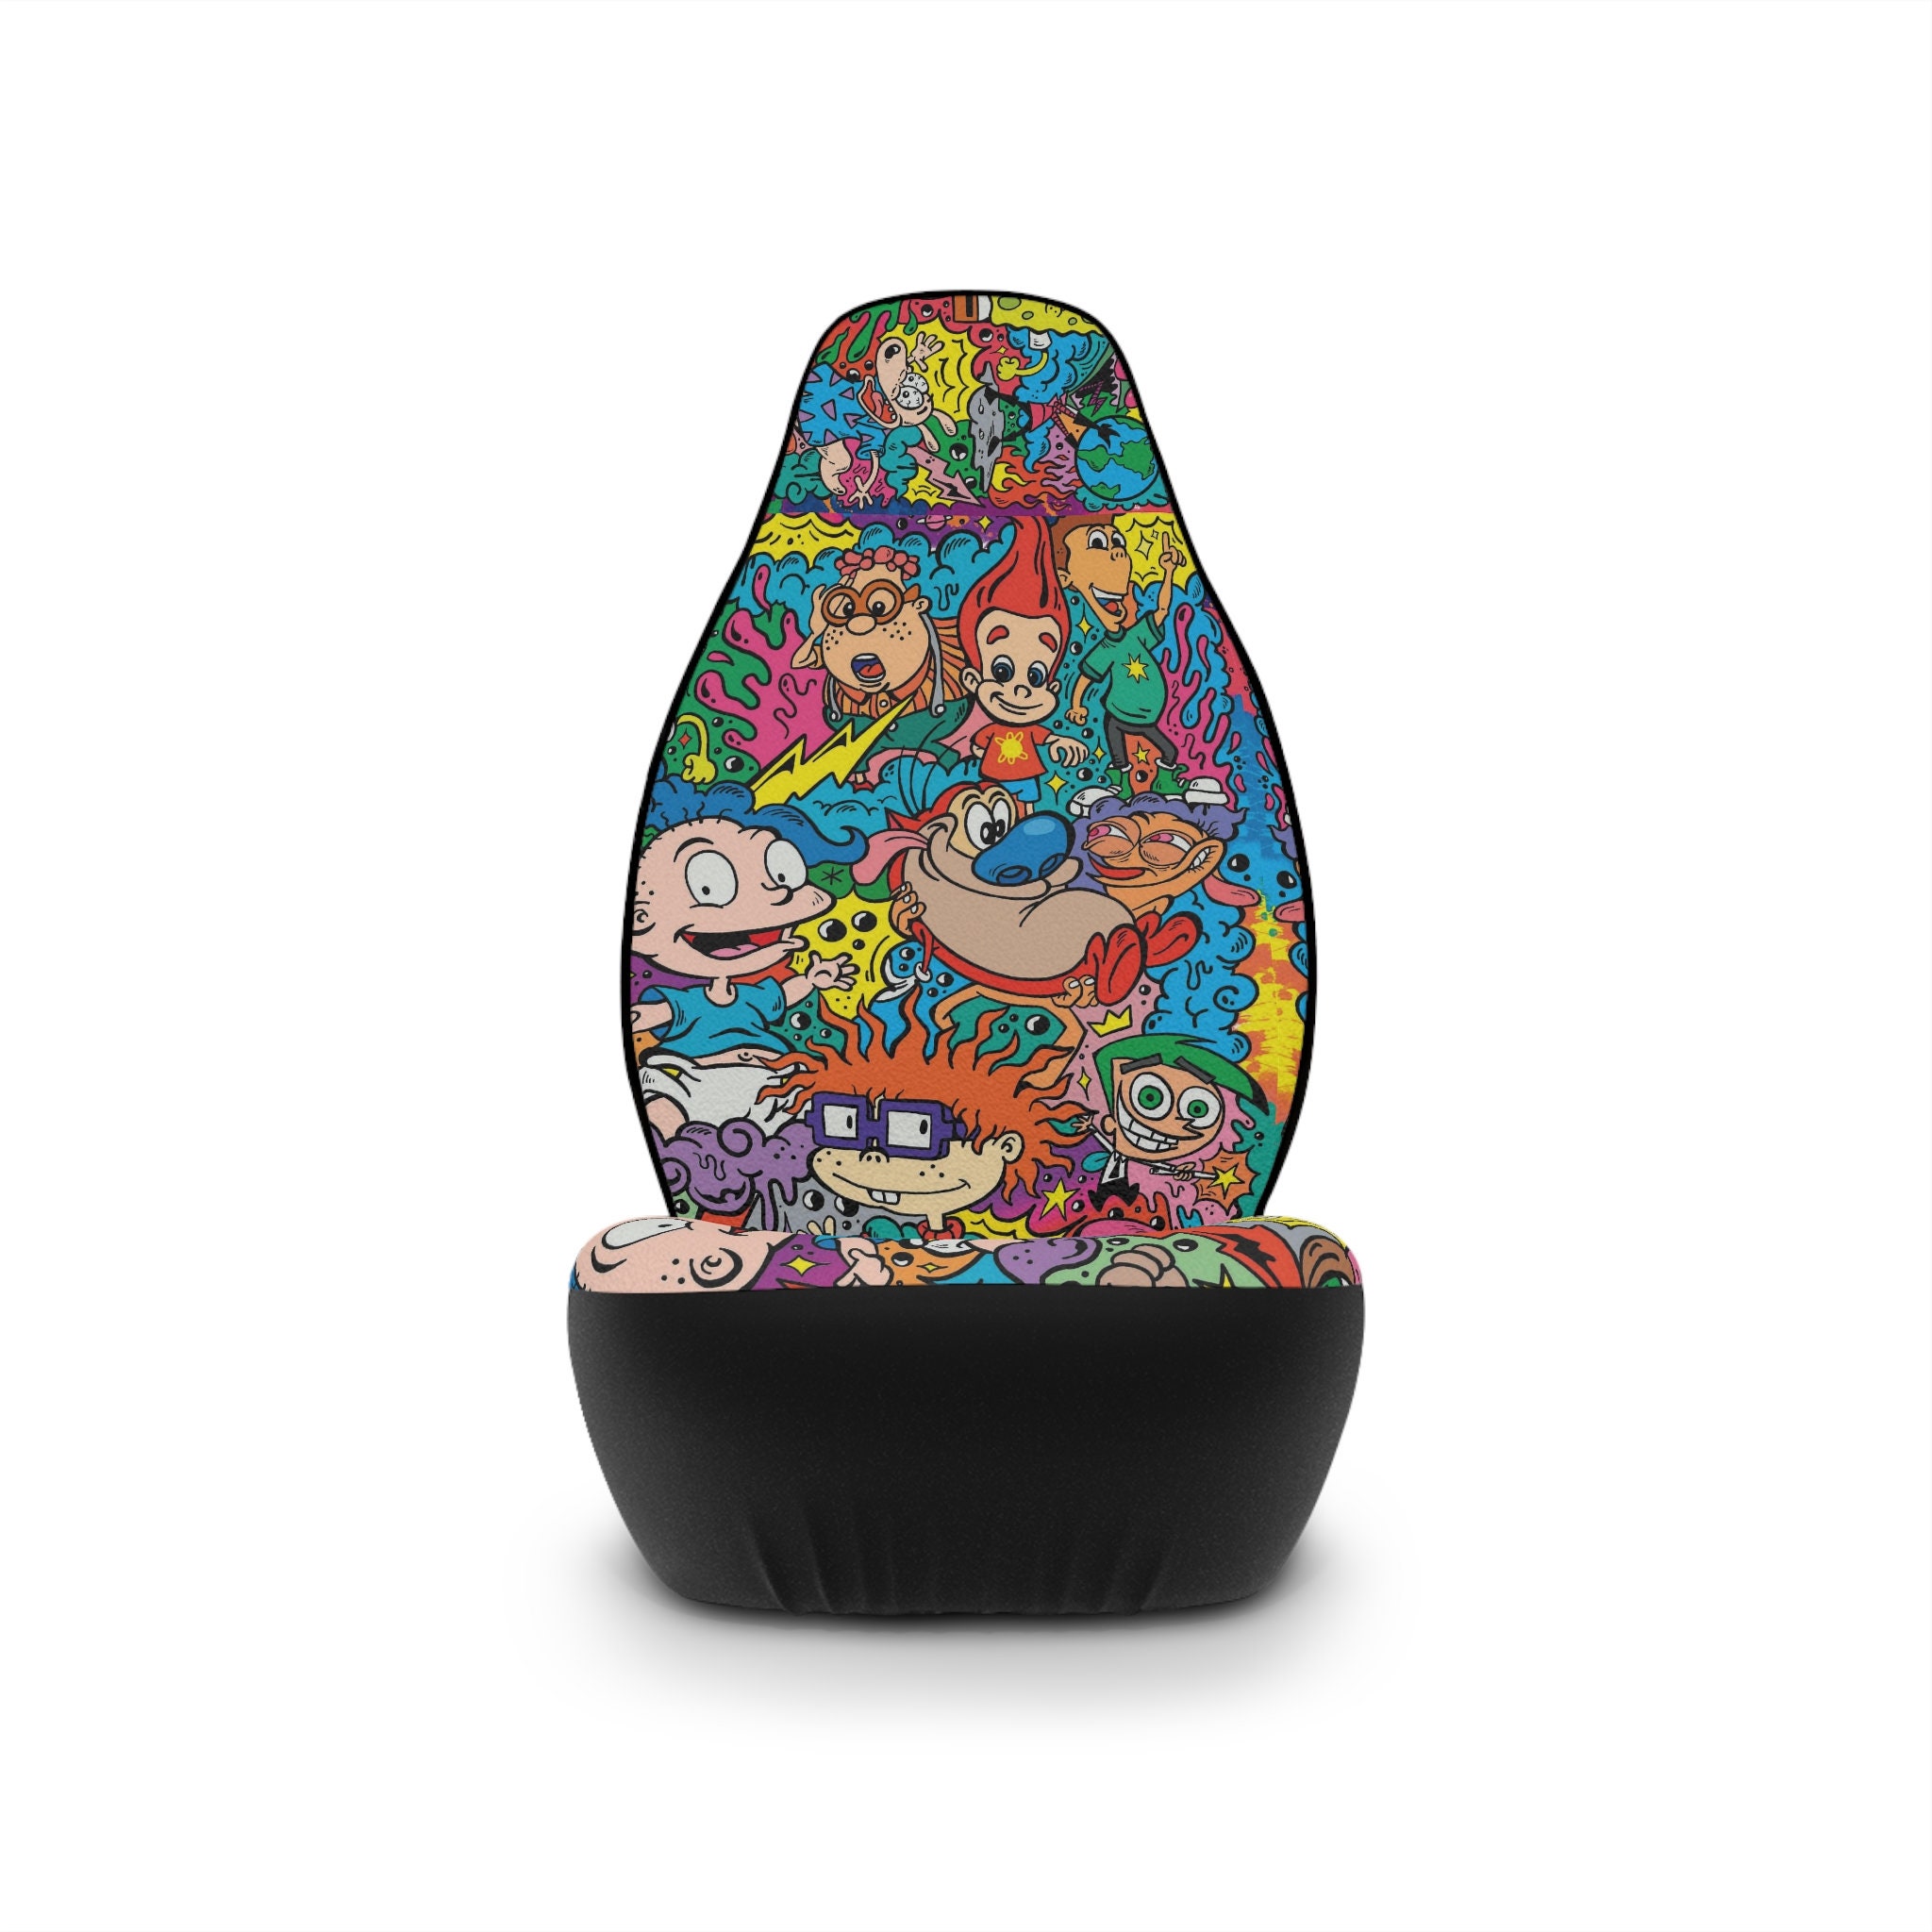 90's Cool Cartoon Seat Cover, Universal, Red, Multicolor, Colorful Fun